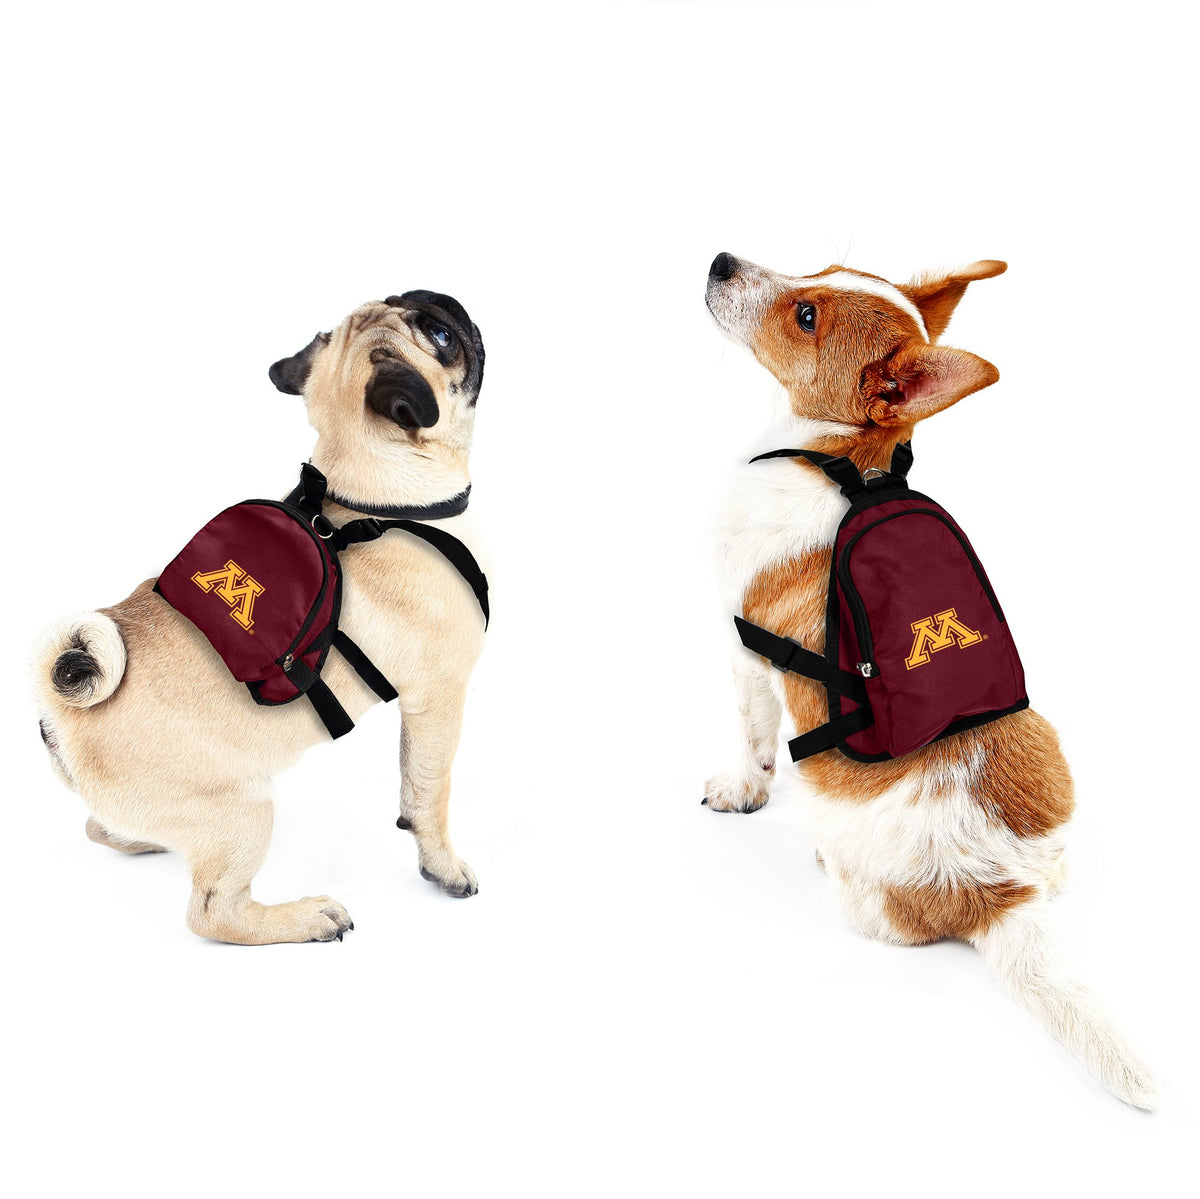 MN Golden Gophers Pet Mini Backpack - 3 Red Rovers